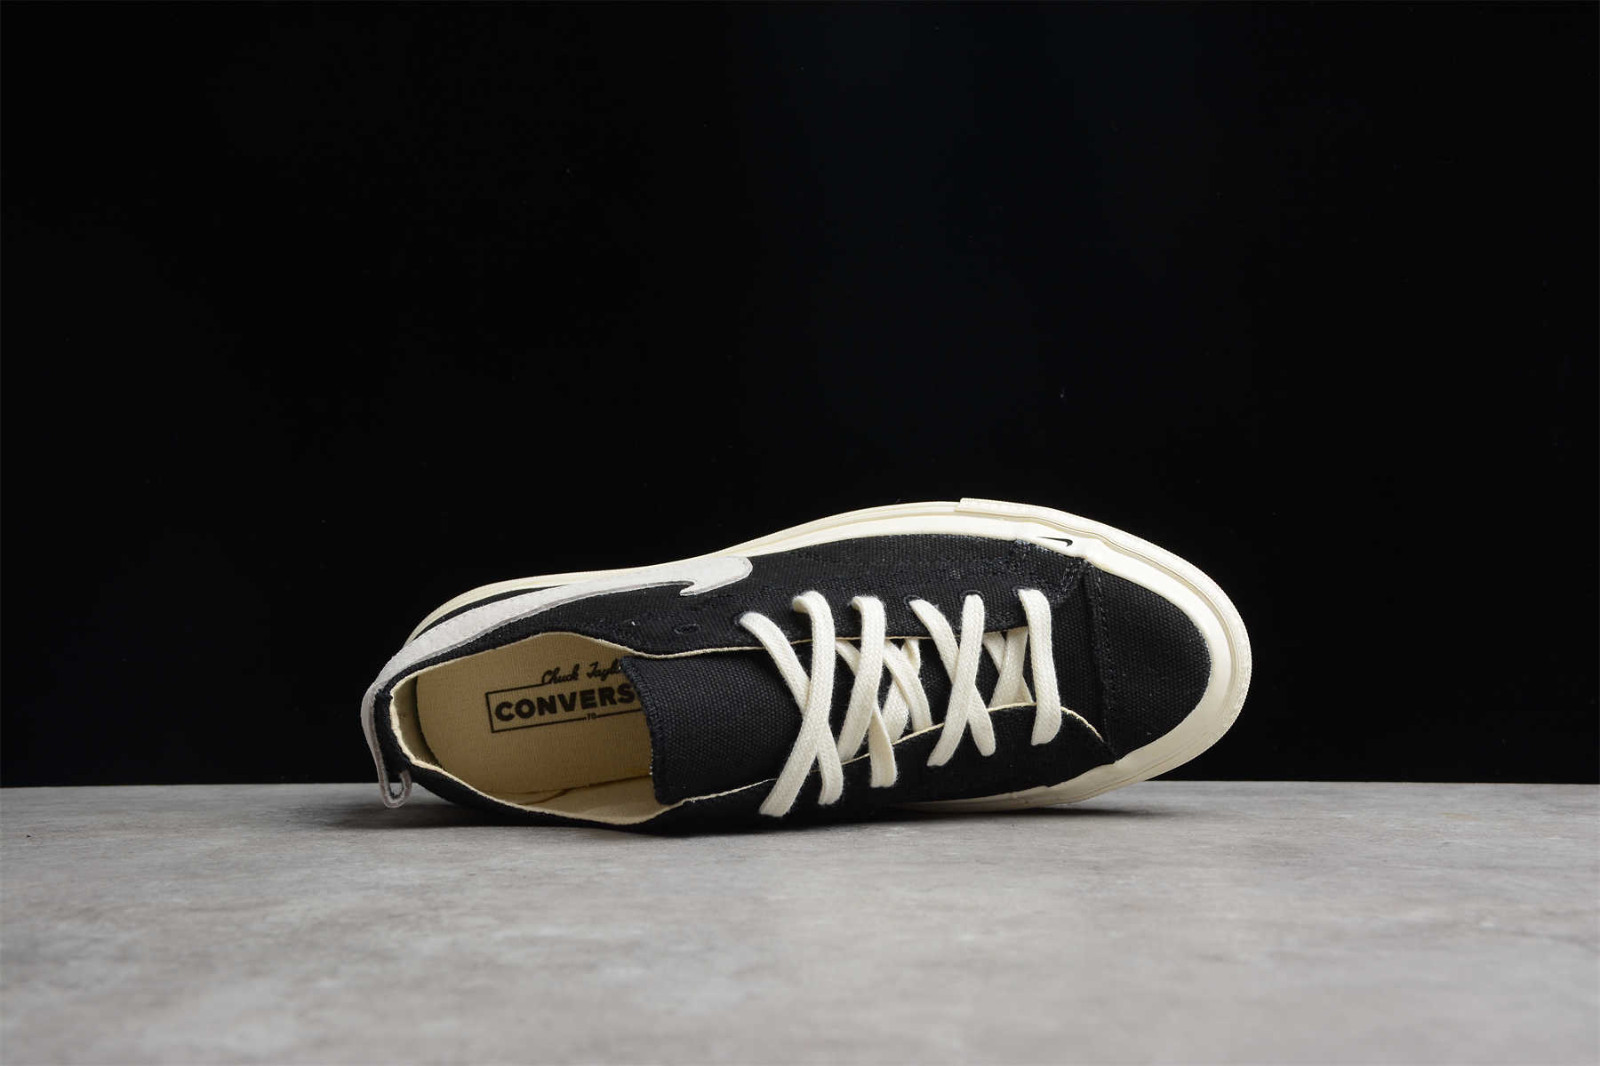 RvceShops - Nike x Converse rush Chuck Taylor All Star 70 OX Black White  162064C - Associate product line manager of Converse rush Footwear and  Pride Network Board Member